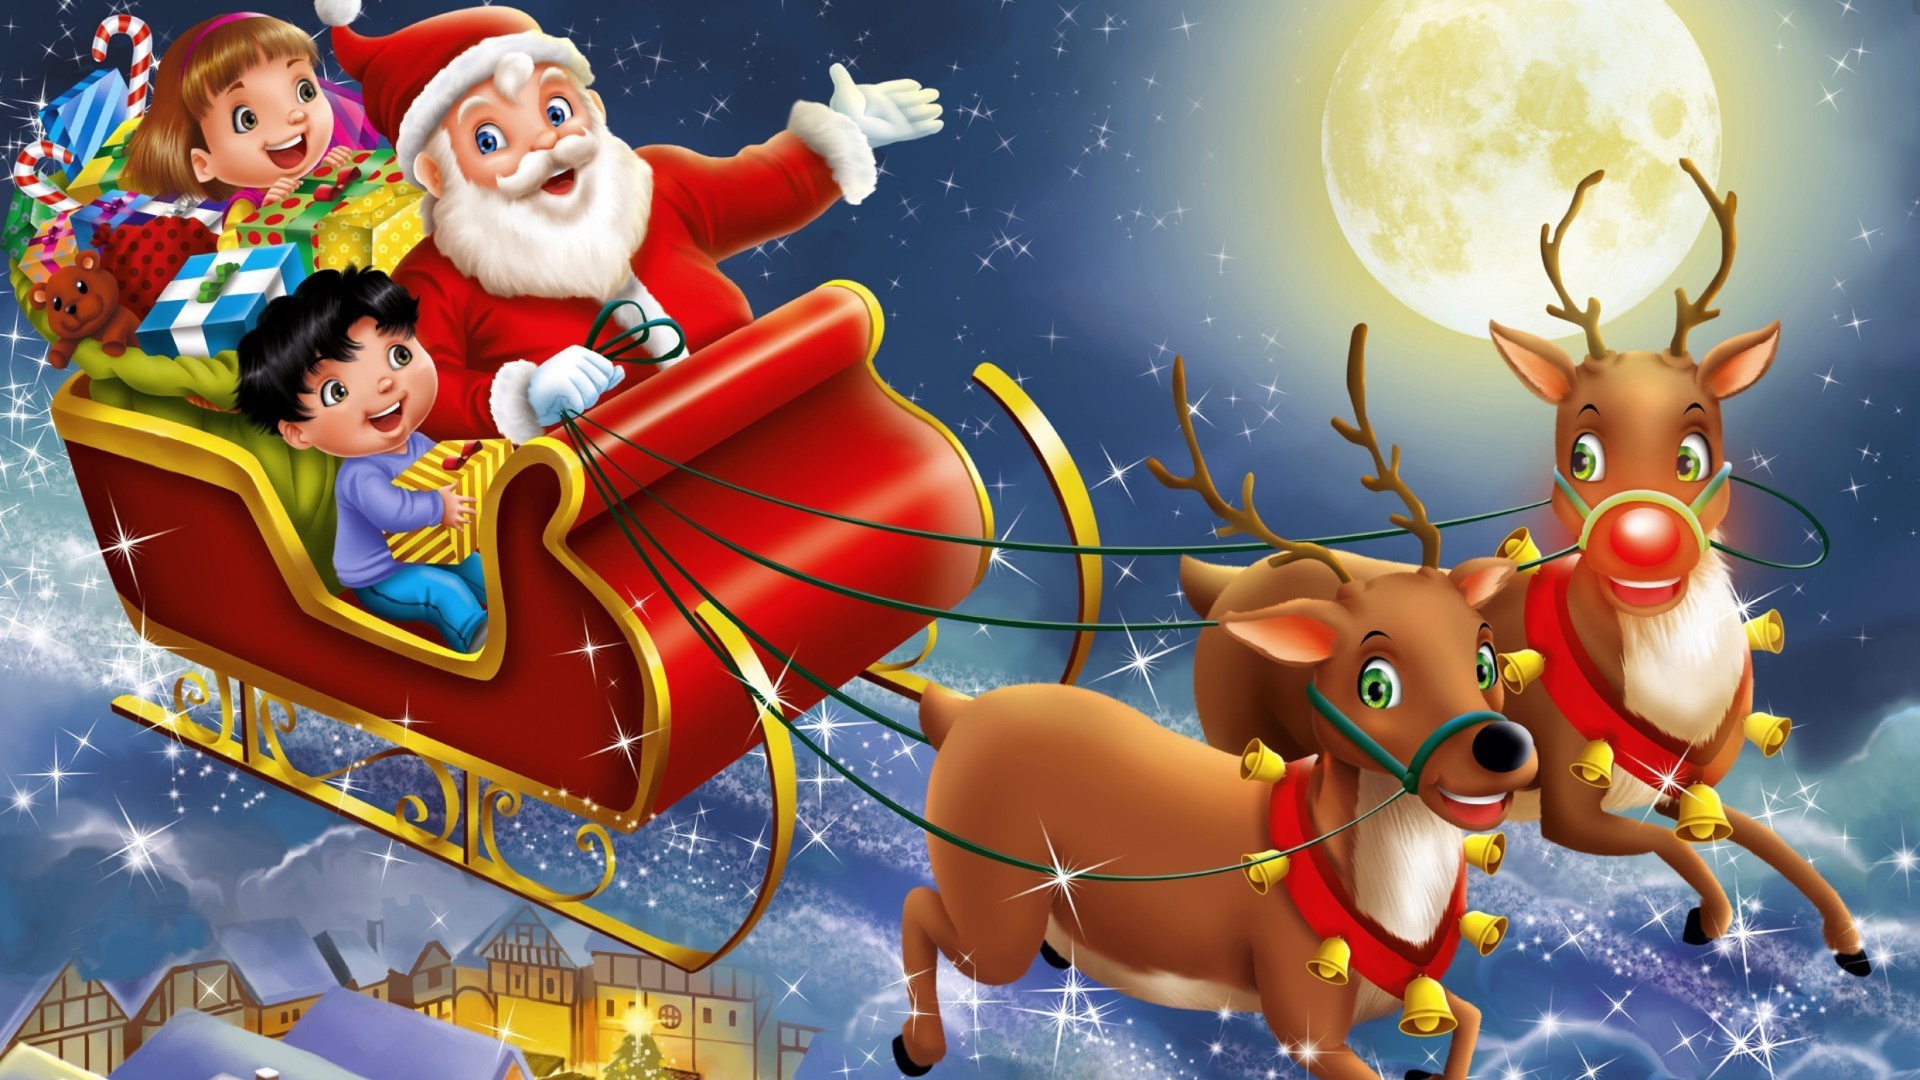 Santa Wishes You A Merry Christmas wallpaper 1920x1080